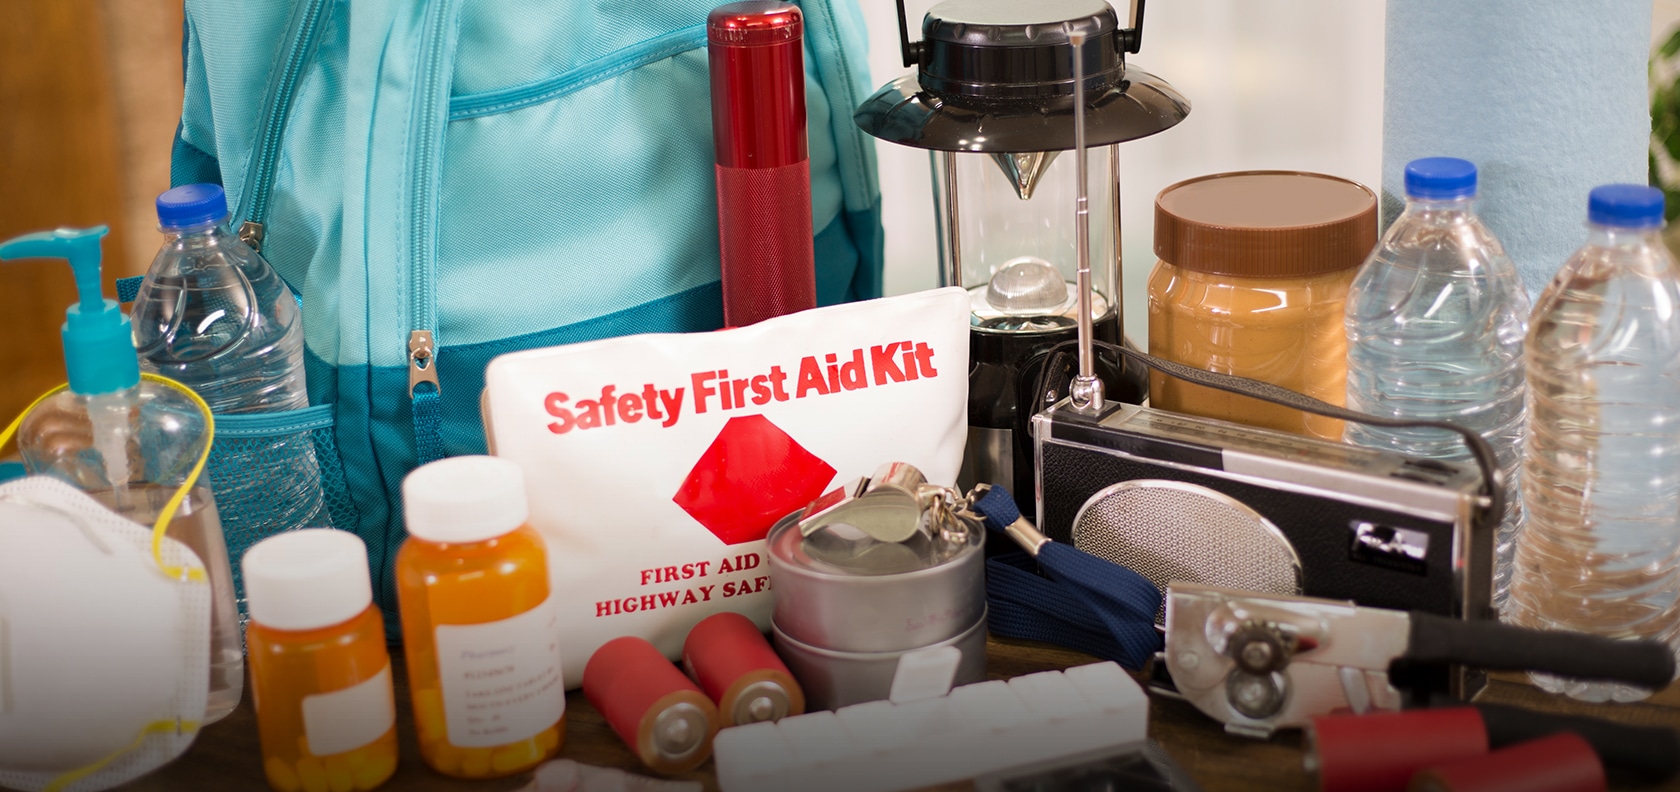 Survival kit: Things you'll need in case of an emergency - ABC News